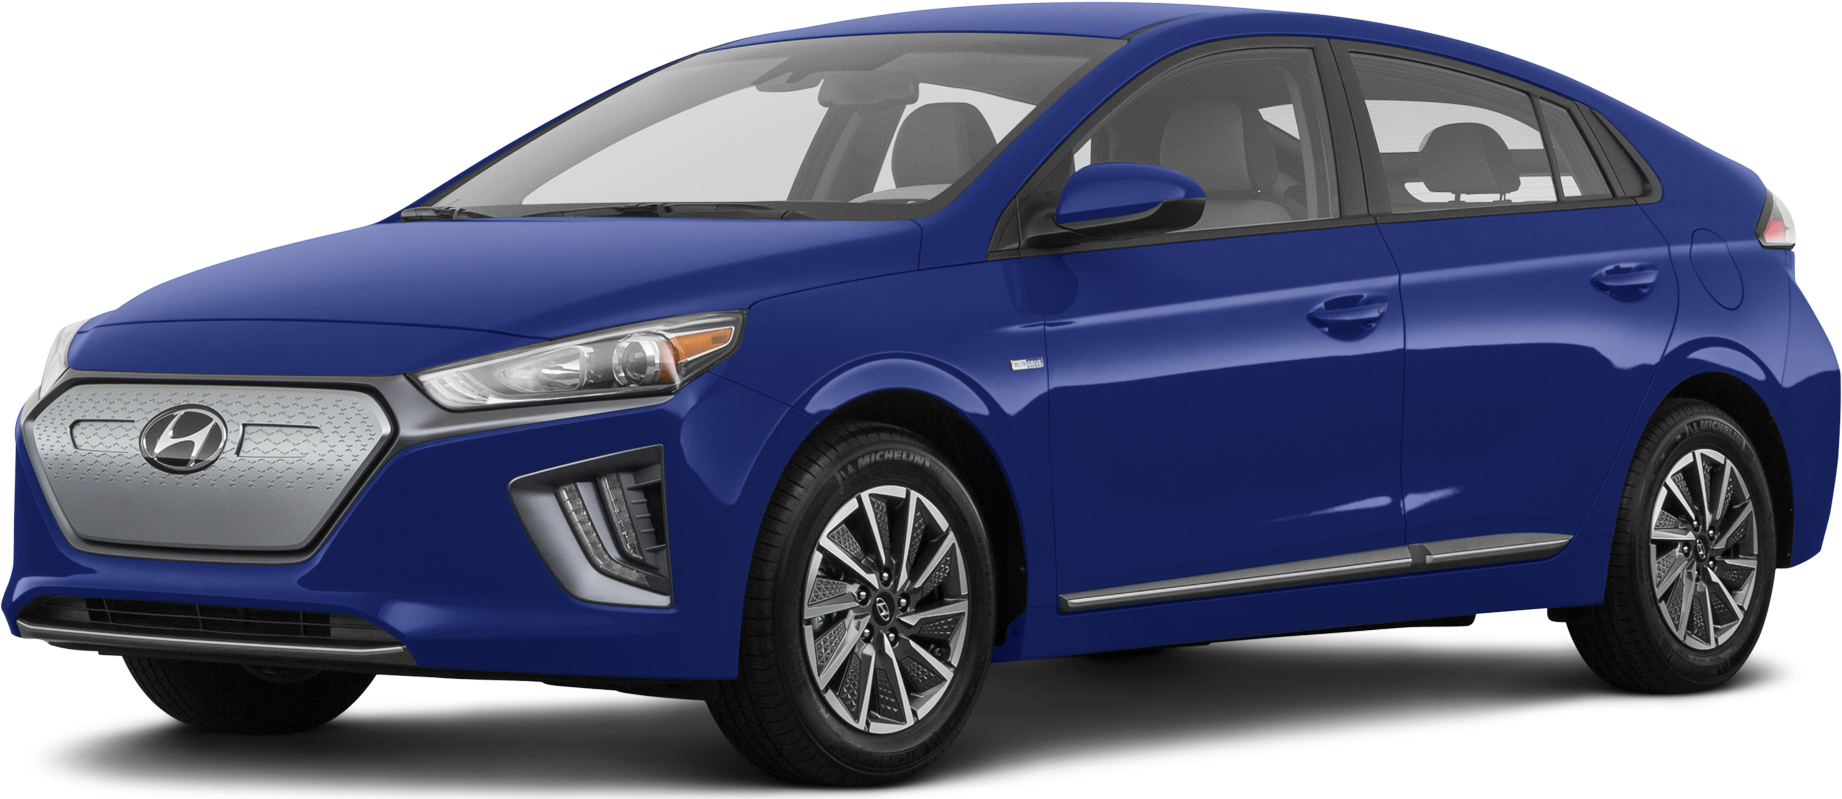 2017 Hyundai Ioniq Electric Review: Going the Distance